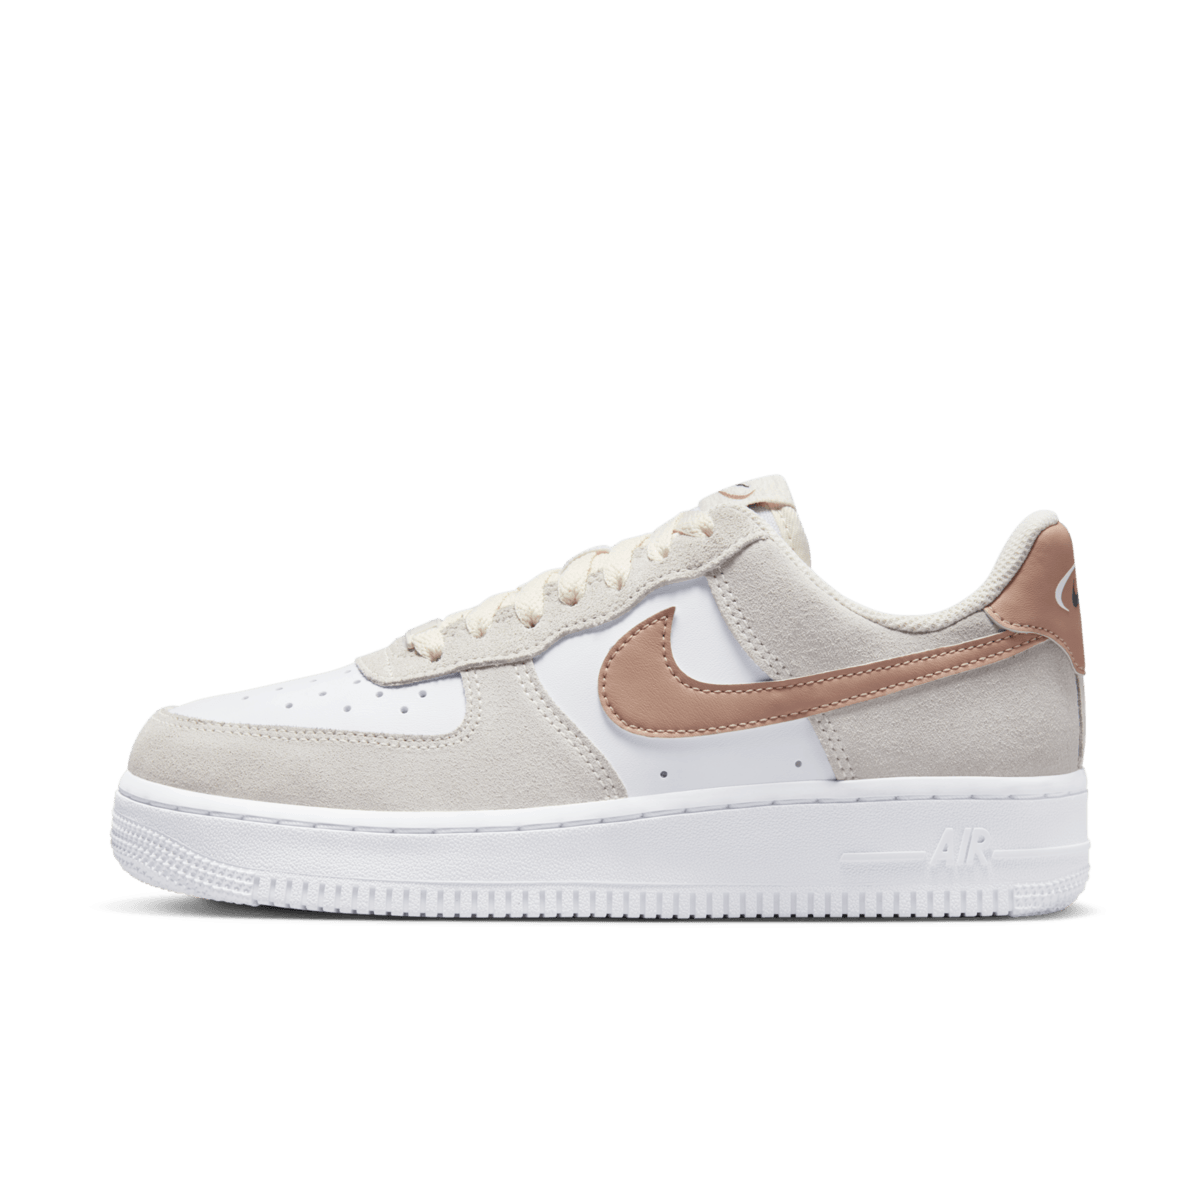 Nike Air Force 1 '07 WMNS 'Dusted Clay'